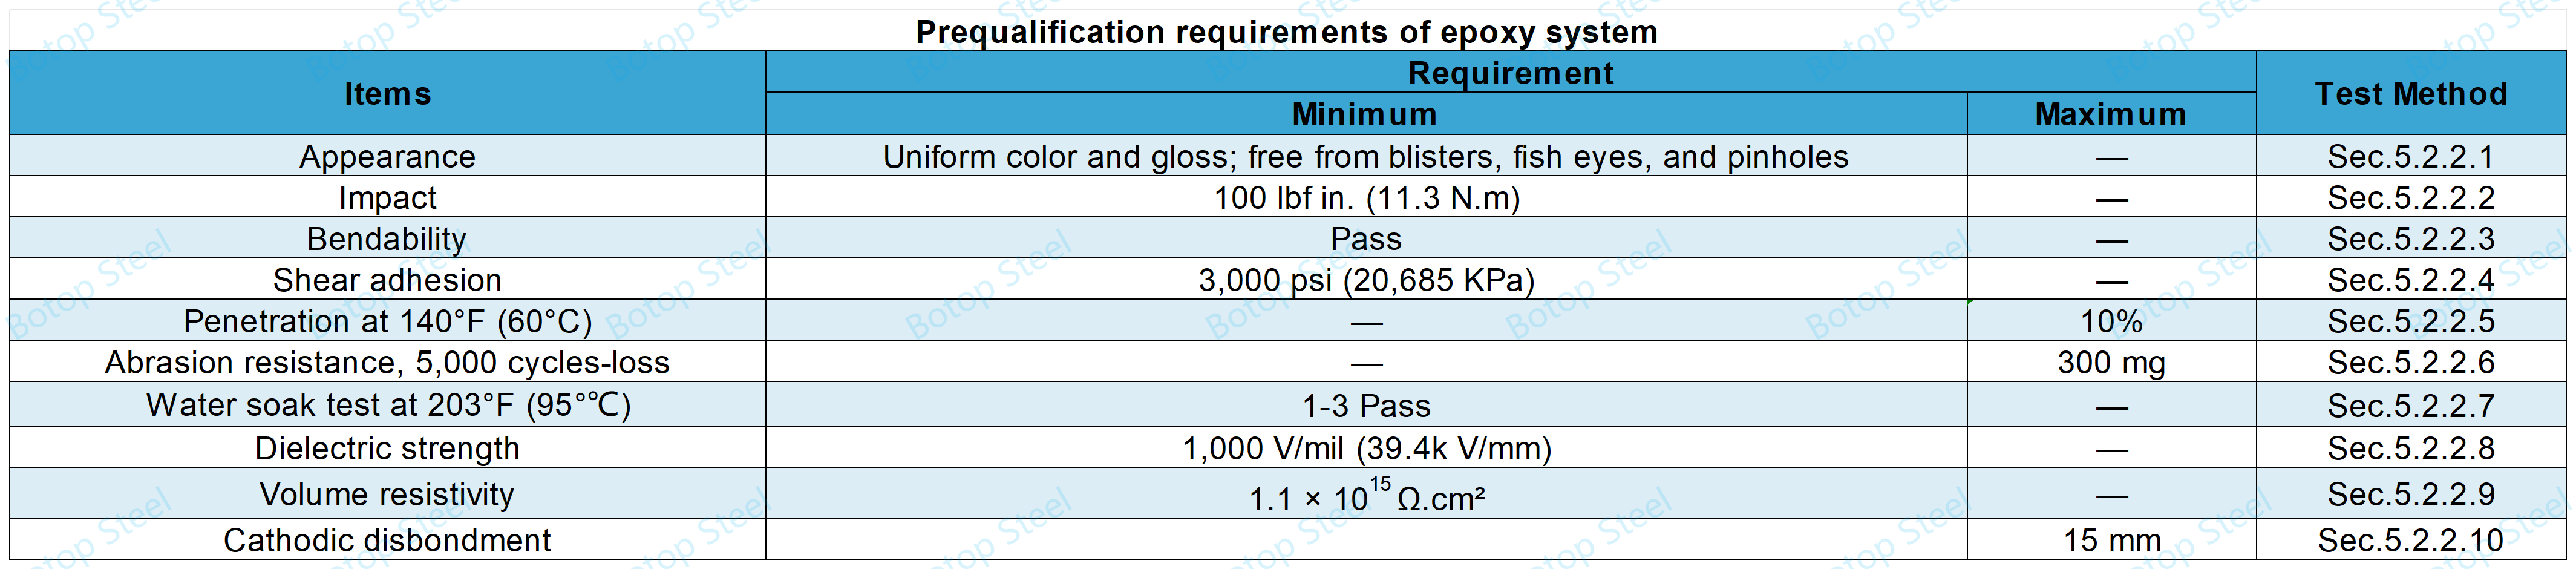 AWWA C213 Prequalification requirements of epoxy system